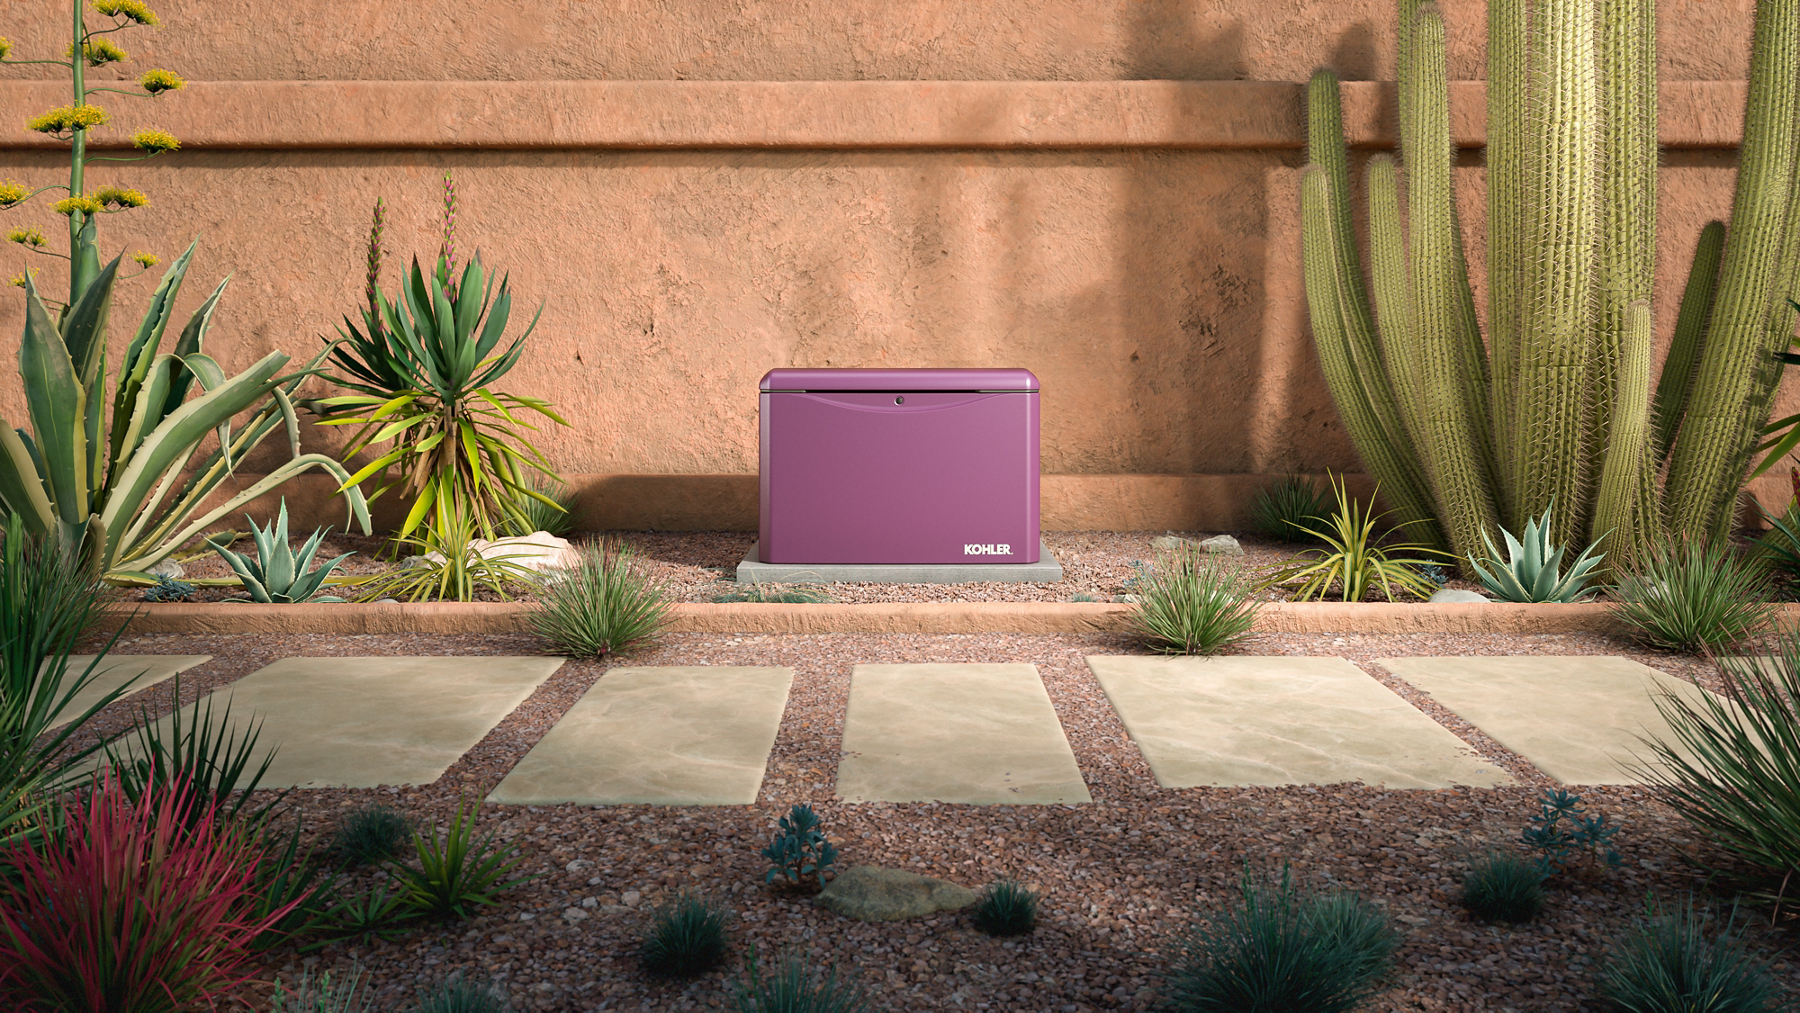 A plum colored home generator in front of a southwestern style house with cacti and succulents nearby.